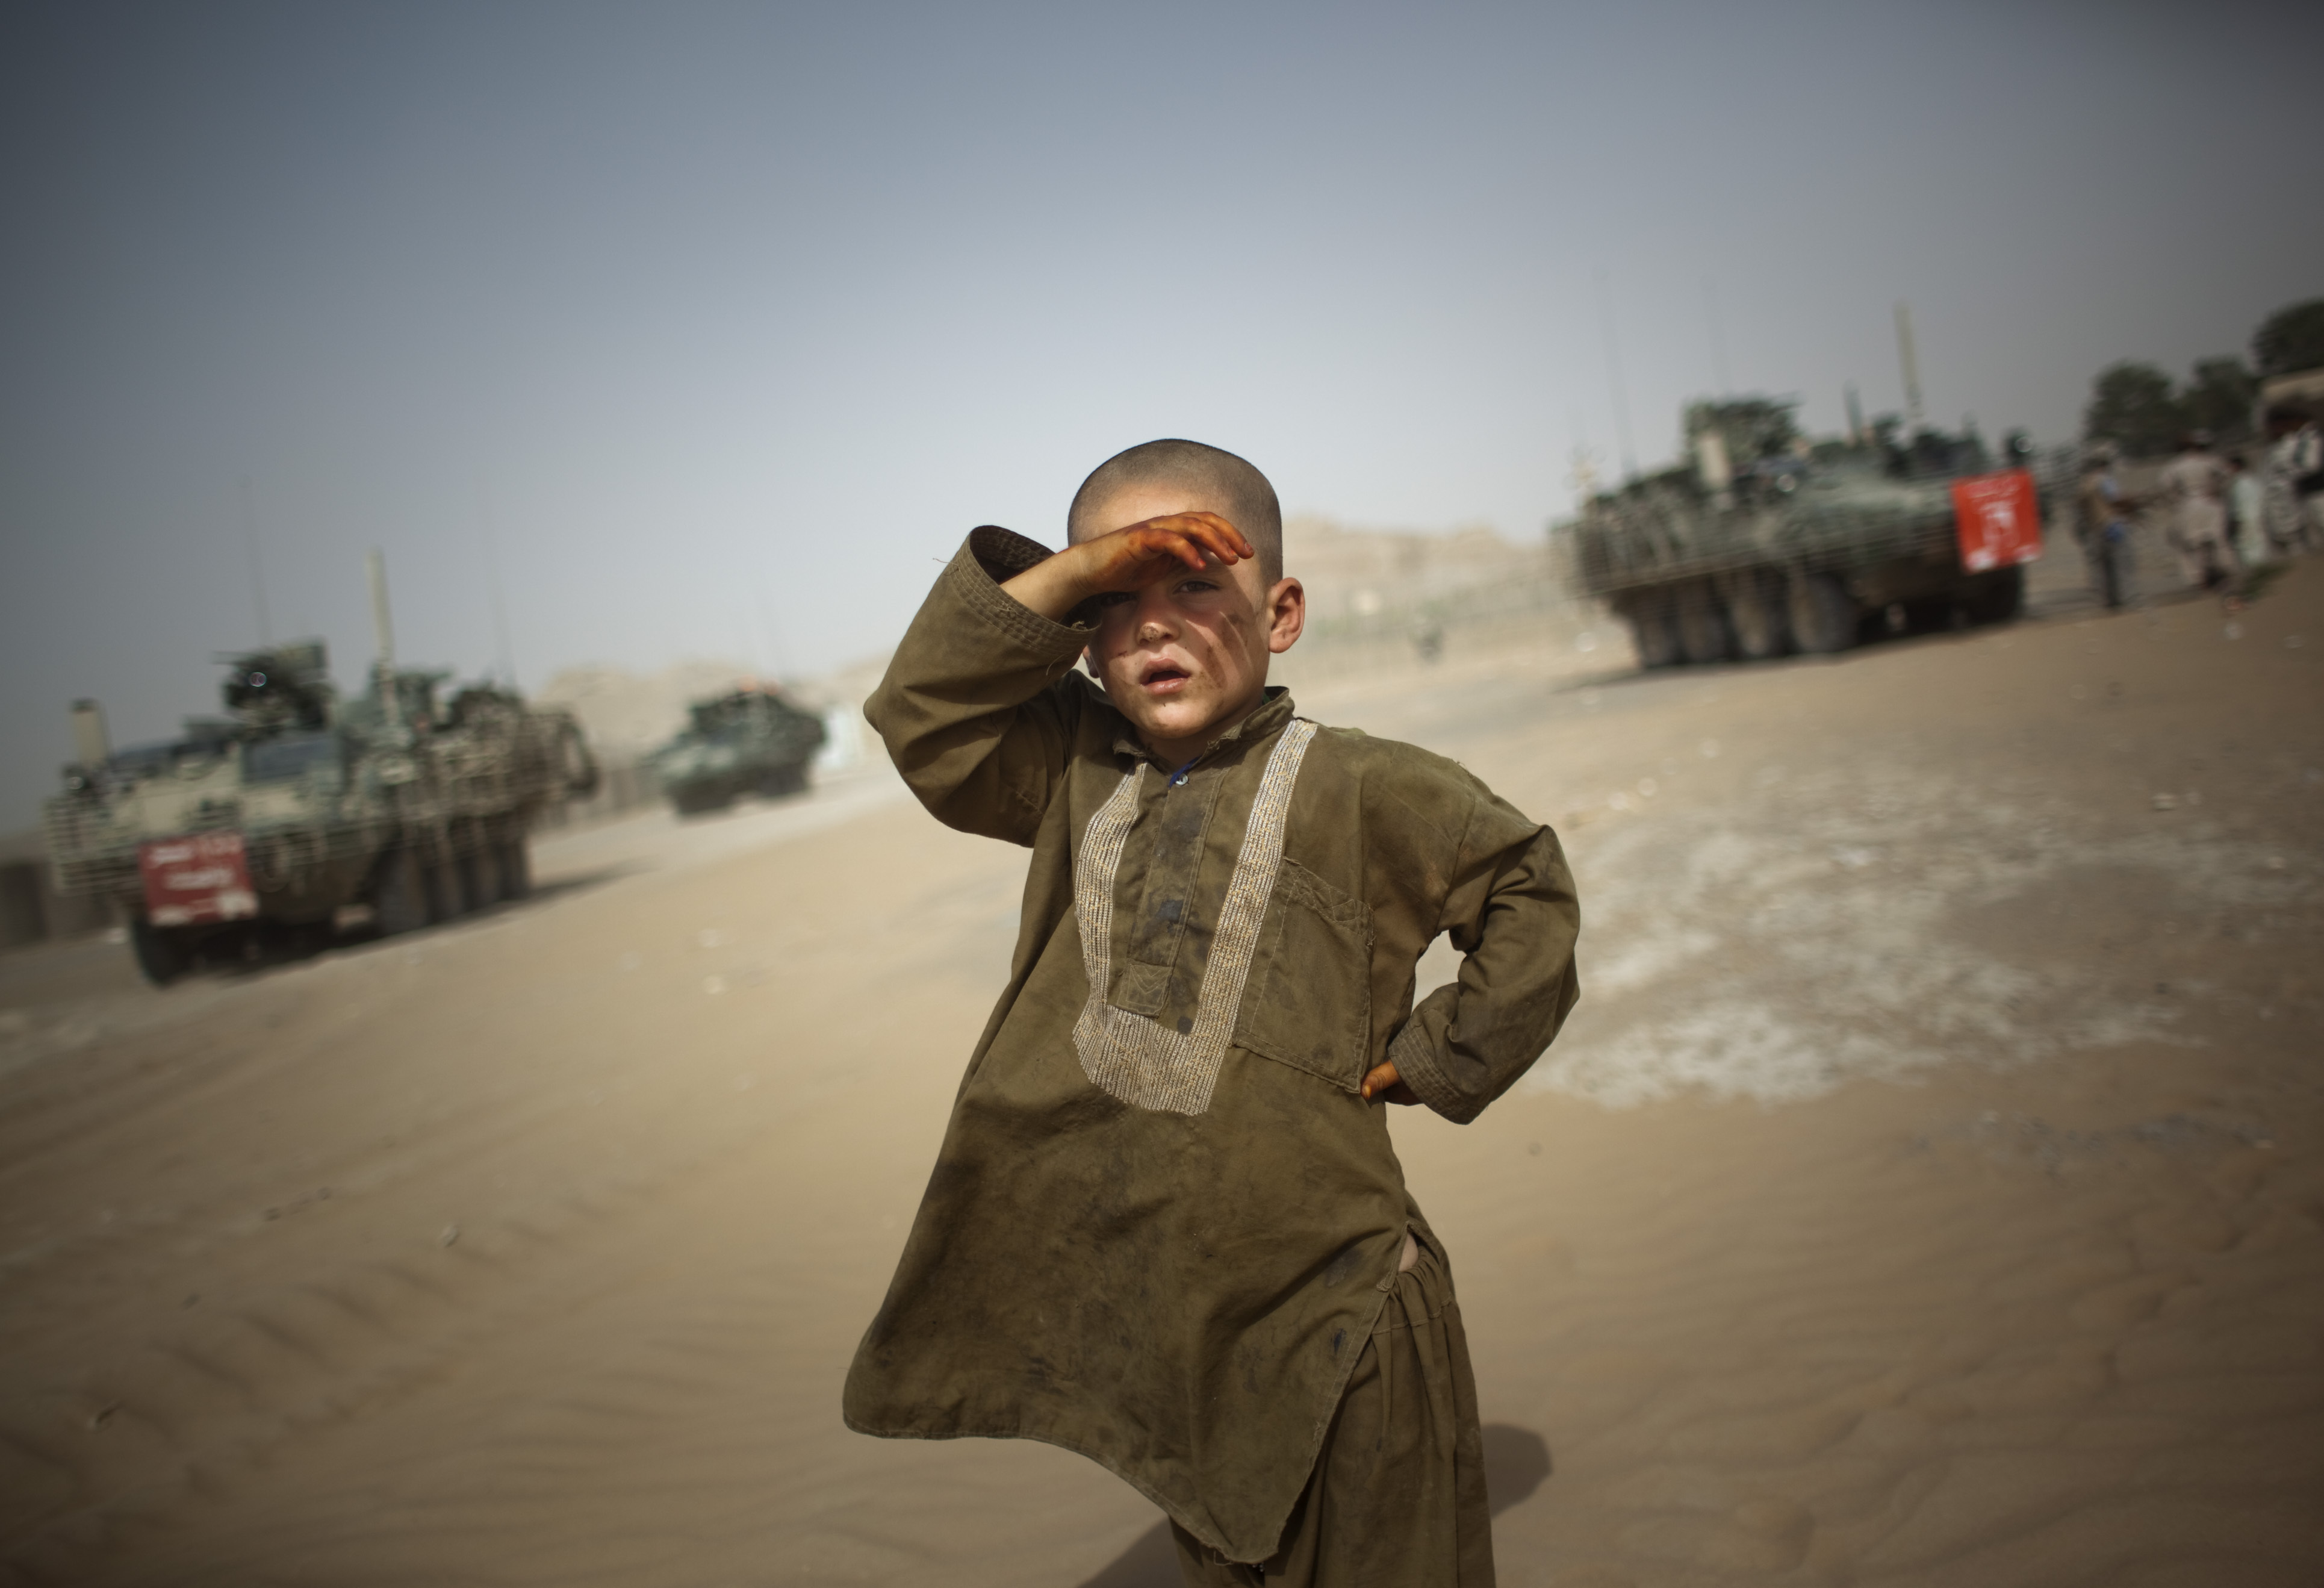 A child looks on as military vehicles drive past his Afghan village in 2009